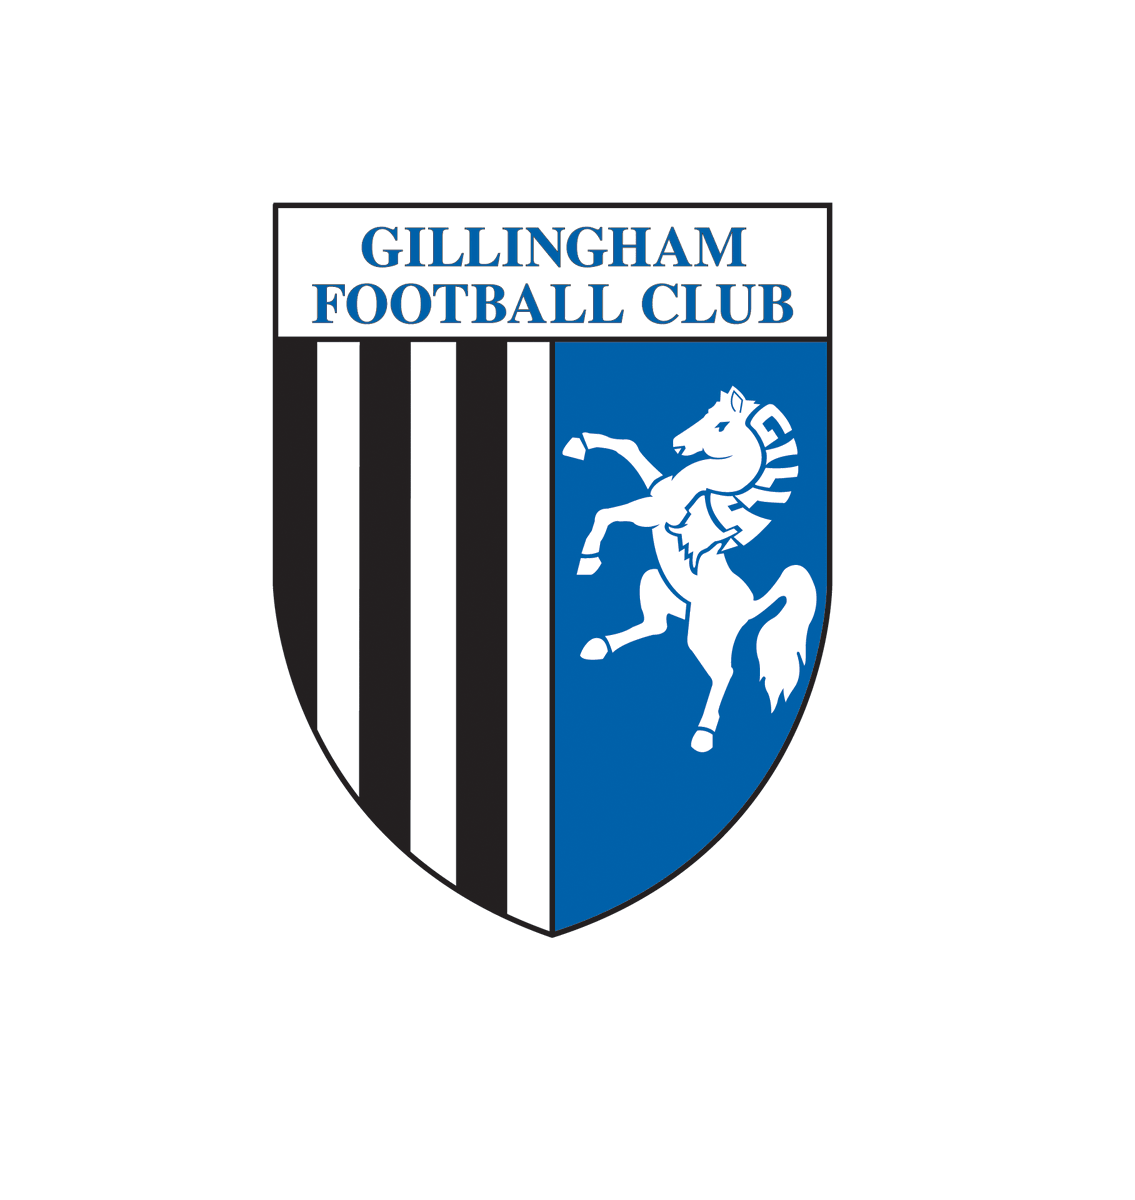 At Gillingham Football Club we pride ourselves with our ongoing commitment to Equality, Diversity & Inclusion. To see our Equality, Diversity & Inclusion commitment statement and policy, this can be found within our EDI drop down tab. gillinghamfootballclub.com/club/edi/ #Gills